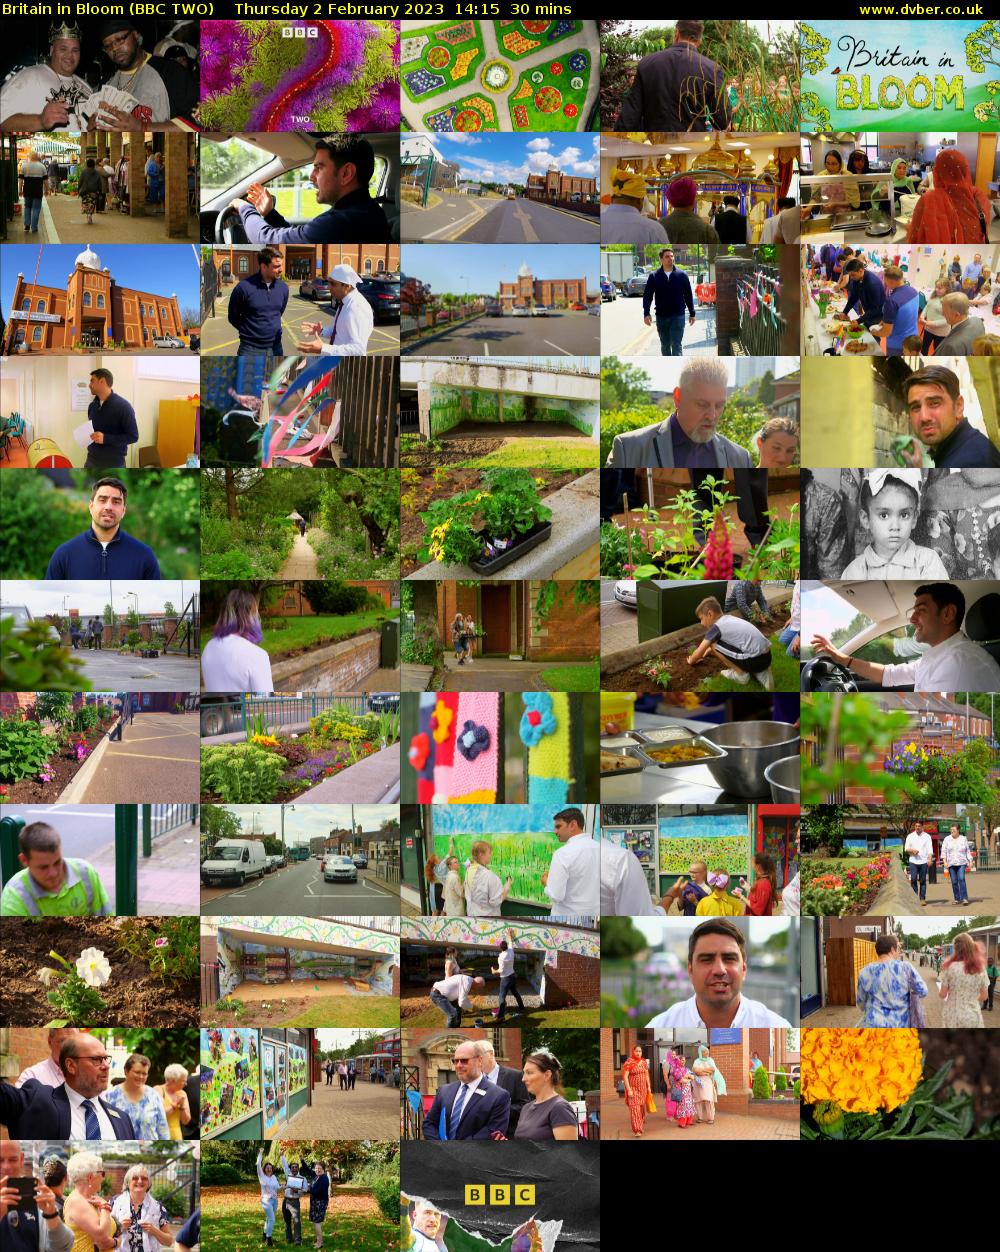 Britain in Bloom (BBC TWO) Thursday 2 February 2023 14:15 - 14:45